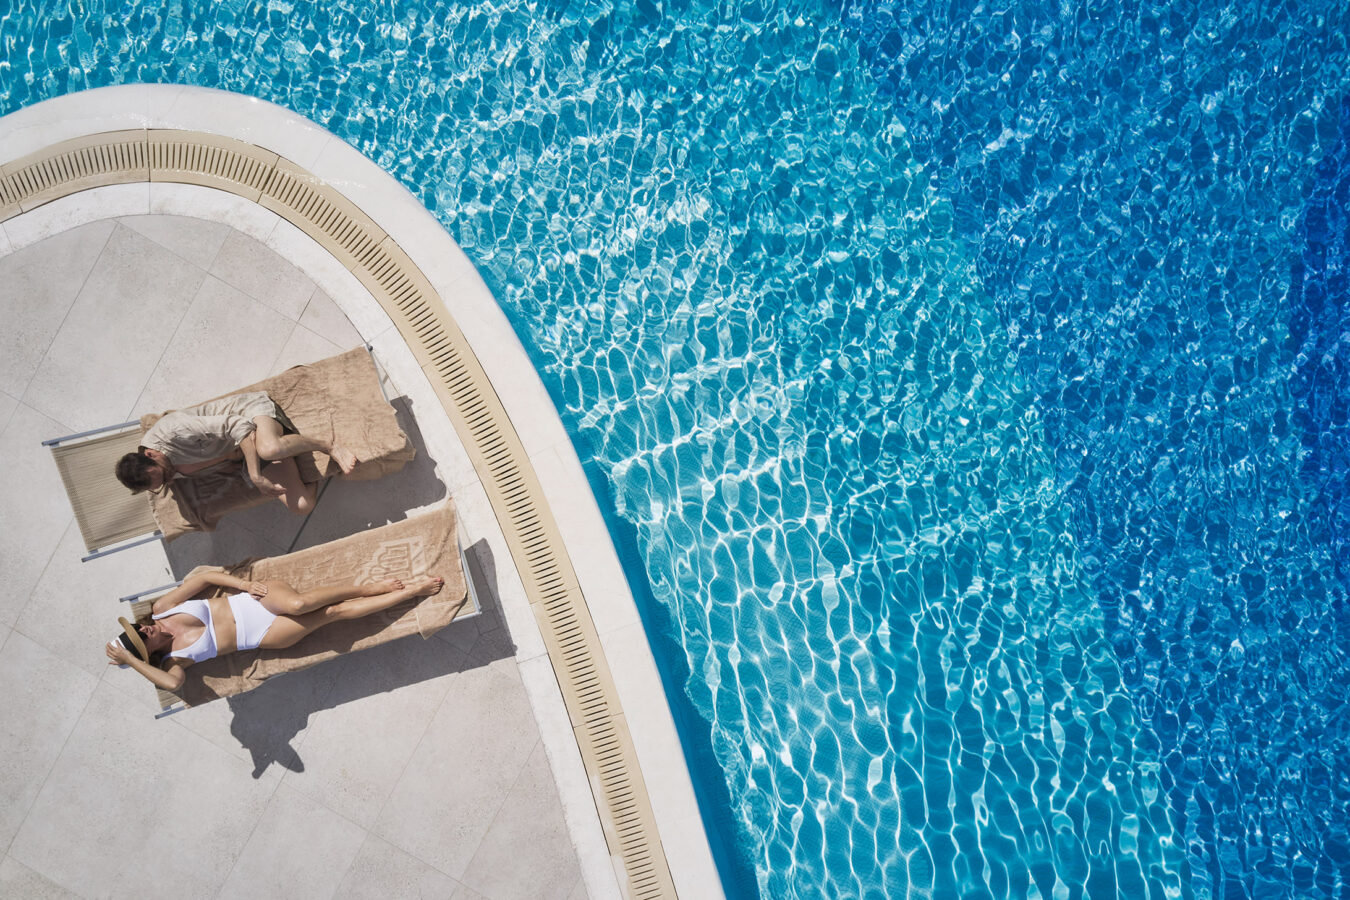 H luxury Rhodes hotels 5-star facilities with all-inclusive board for adults or families.